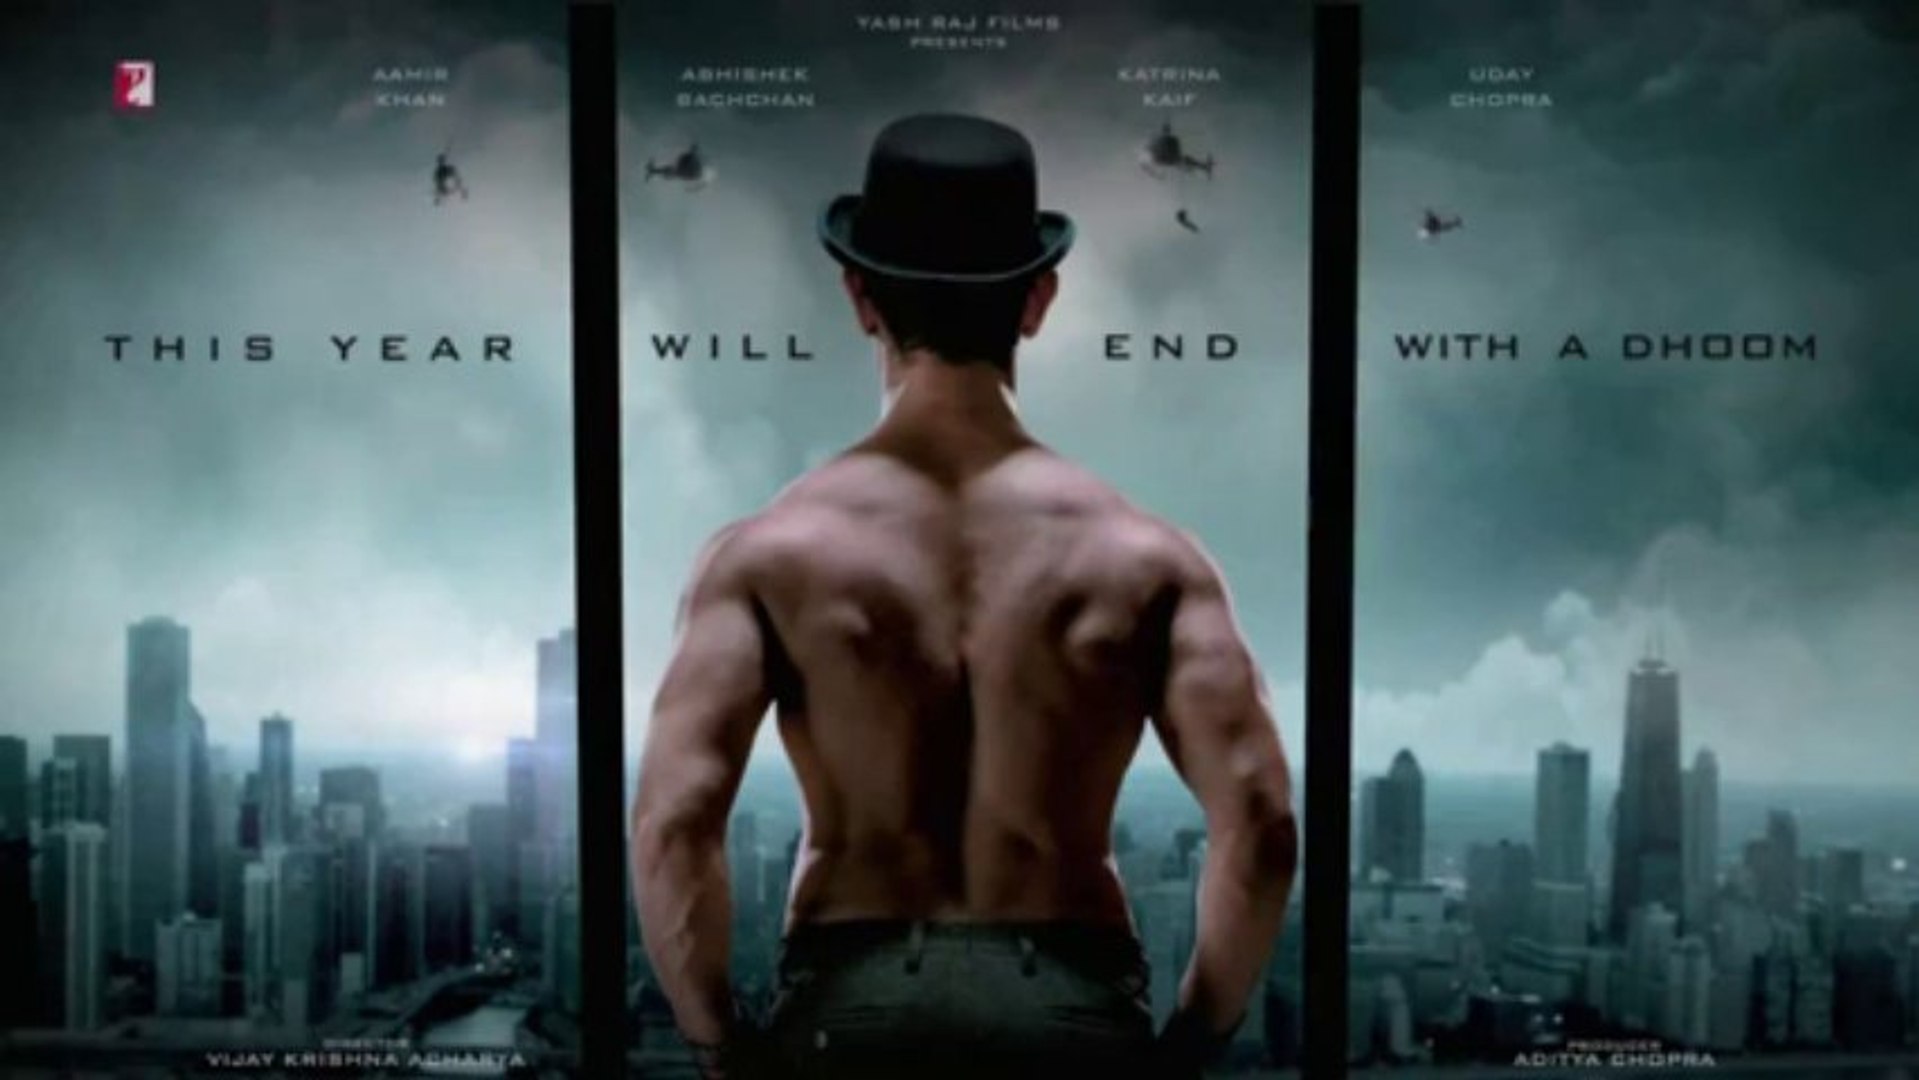 DHOOM 3 - HD Hindi Movie [2013] MOTION POSTER - video Dailymotion